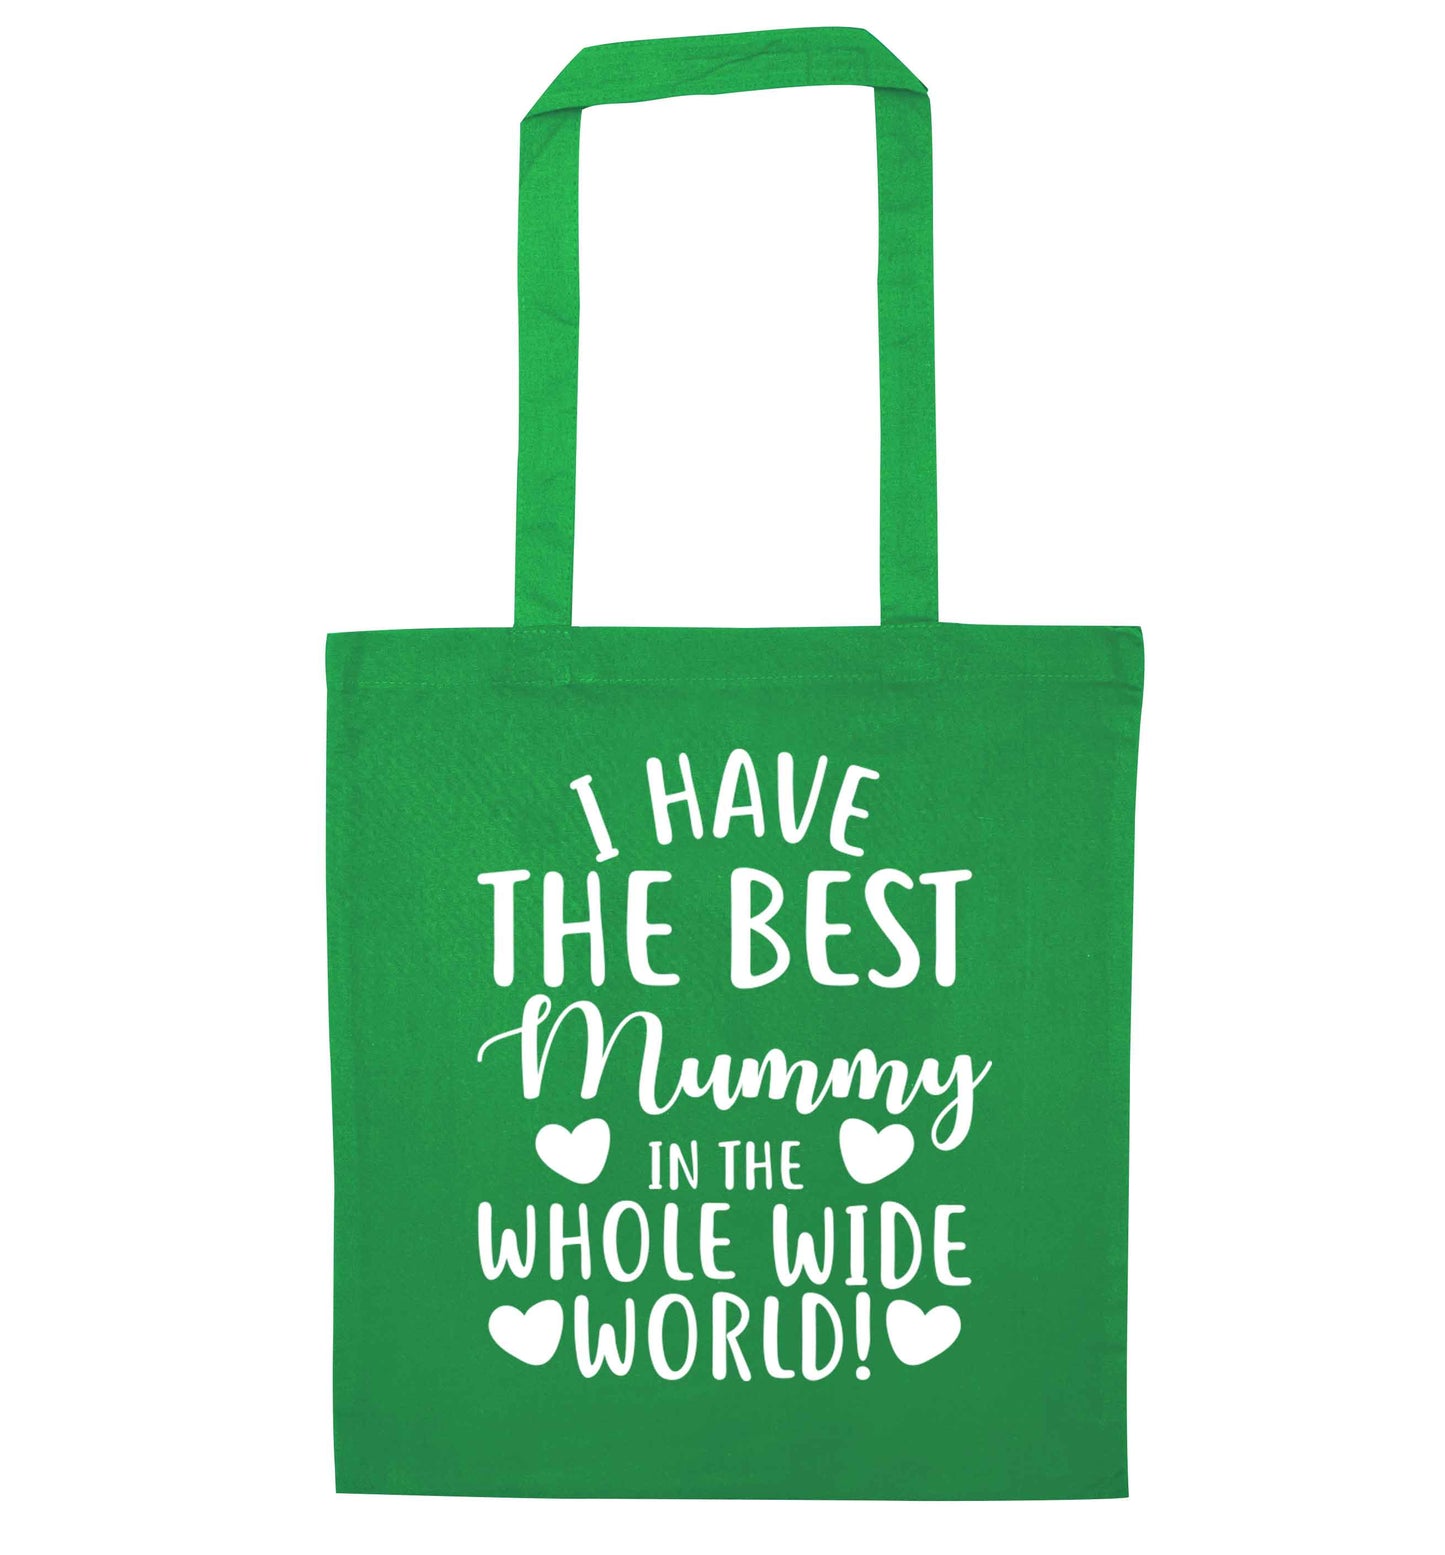 I have the best mummy in the whole wide world green tote bag